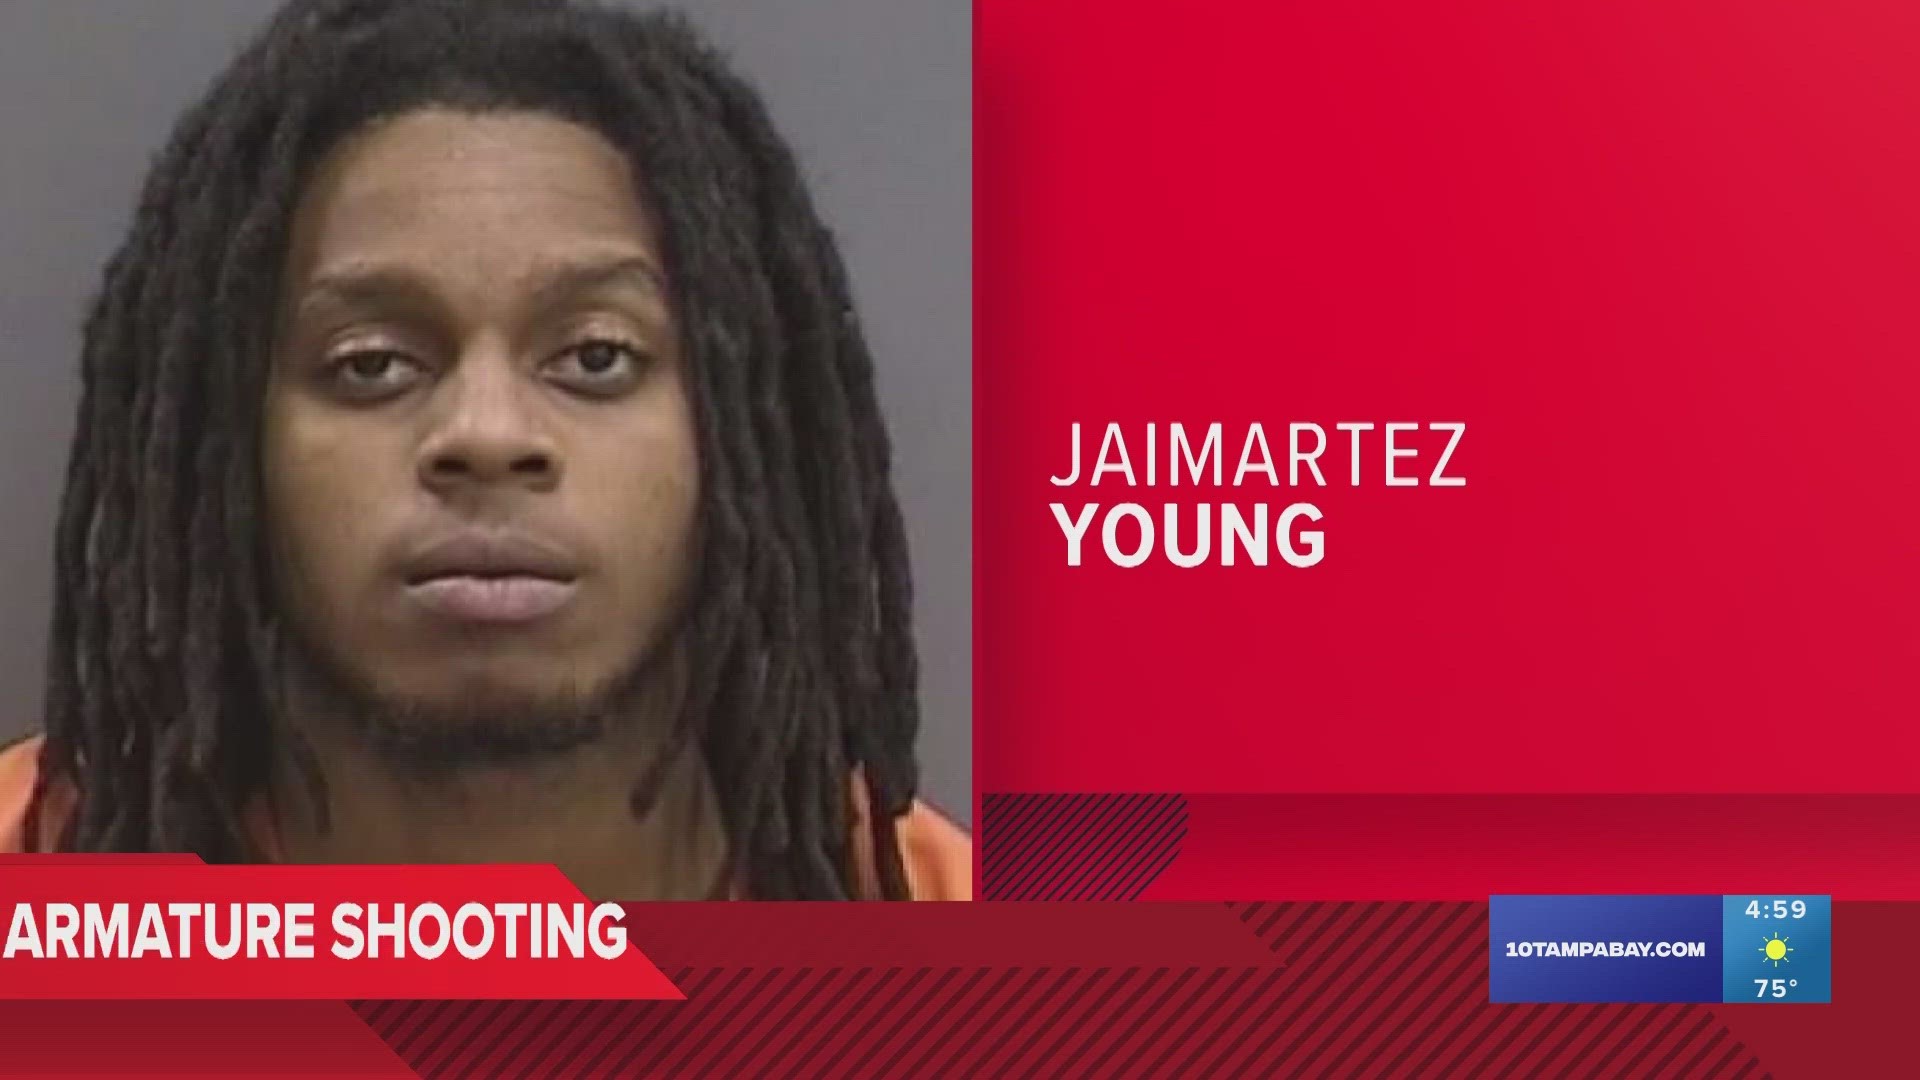 Tampa police say 19-year-old Jaimartez Young turned himself in to authorities on Friday afternoon.